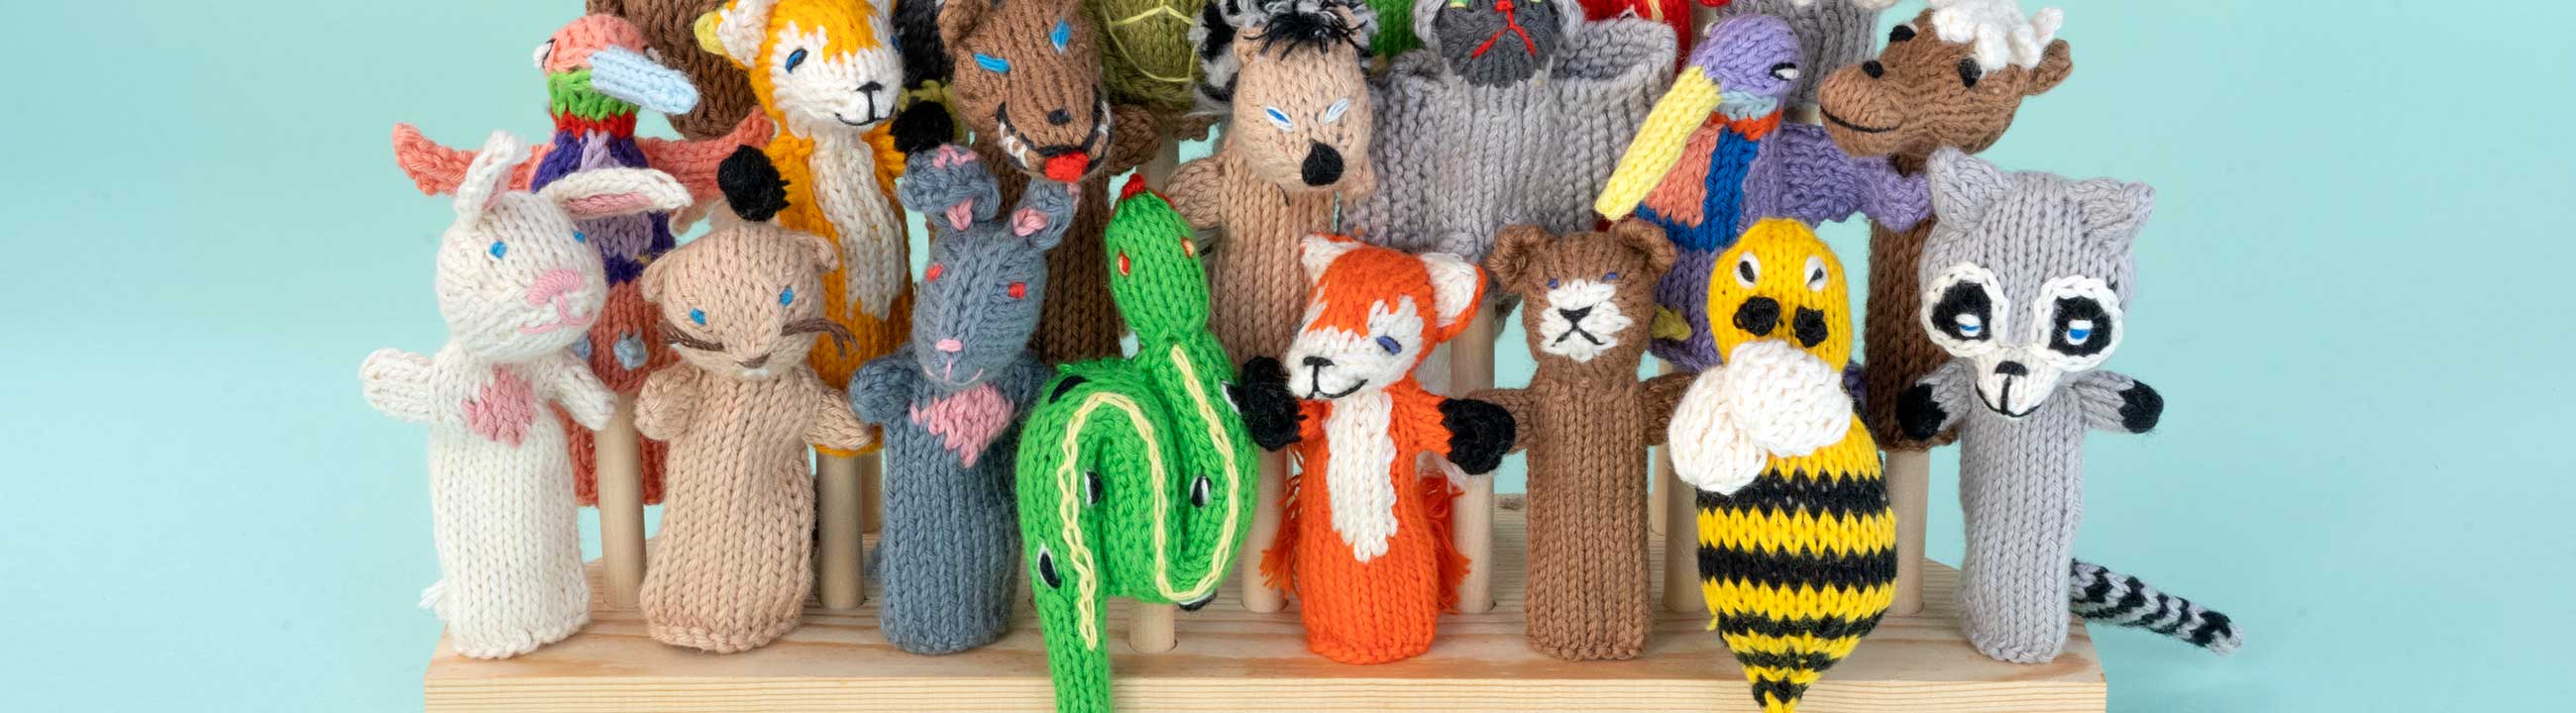 finger puppet eco-friendly toys - wholesale by Lucuma Designs